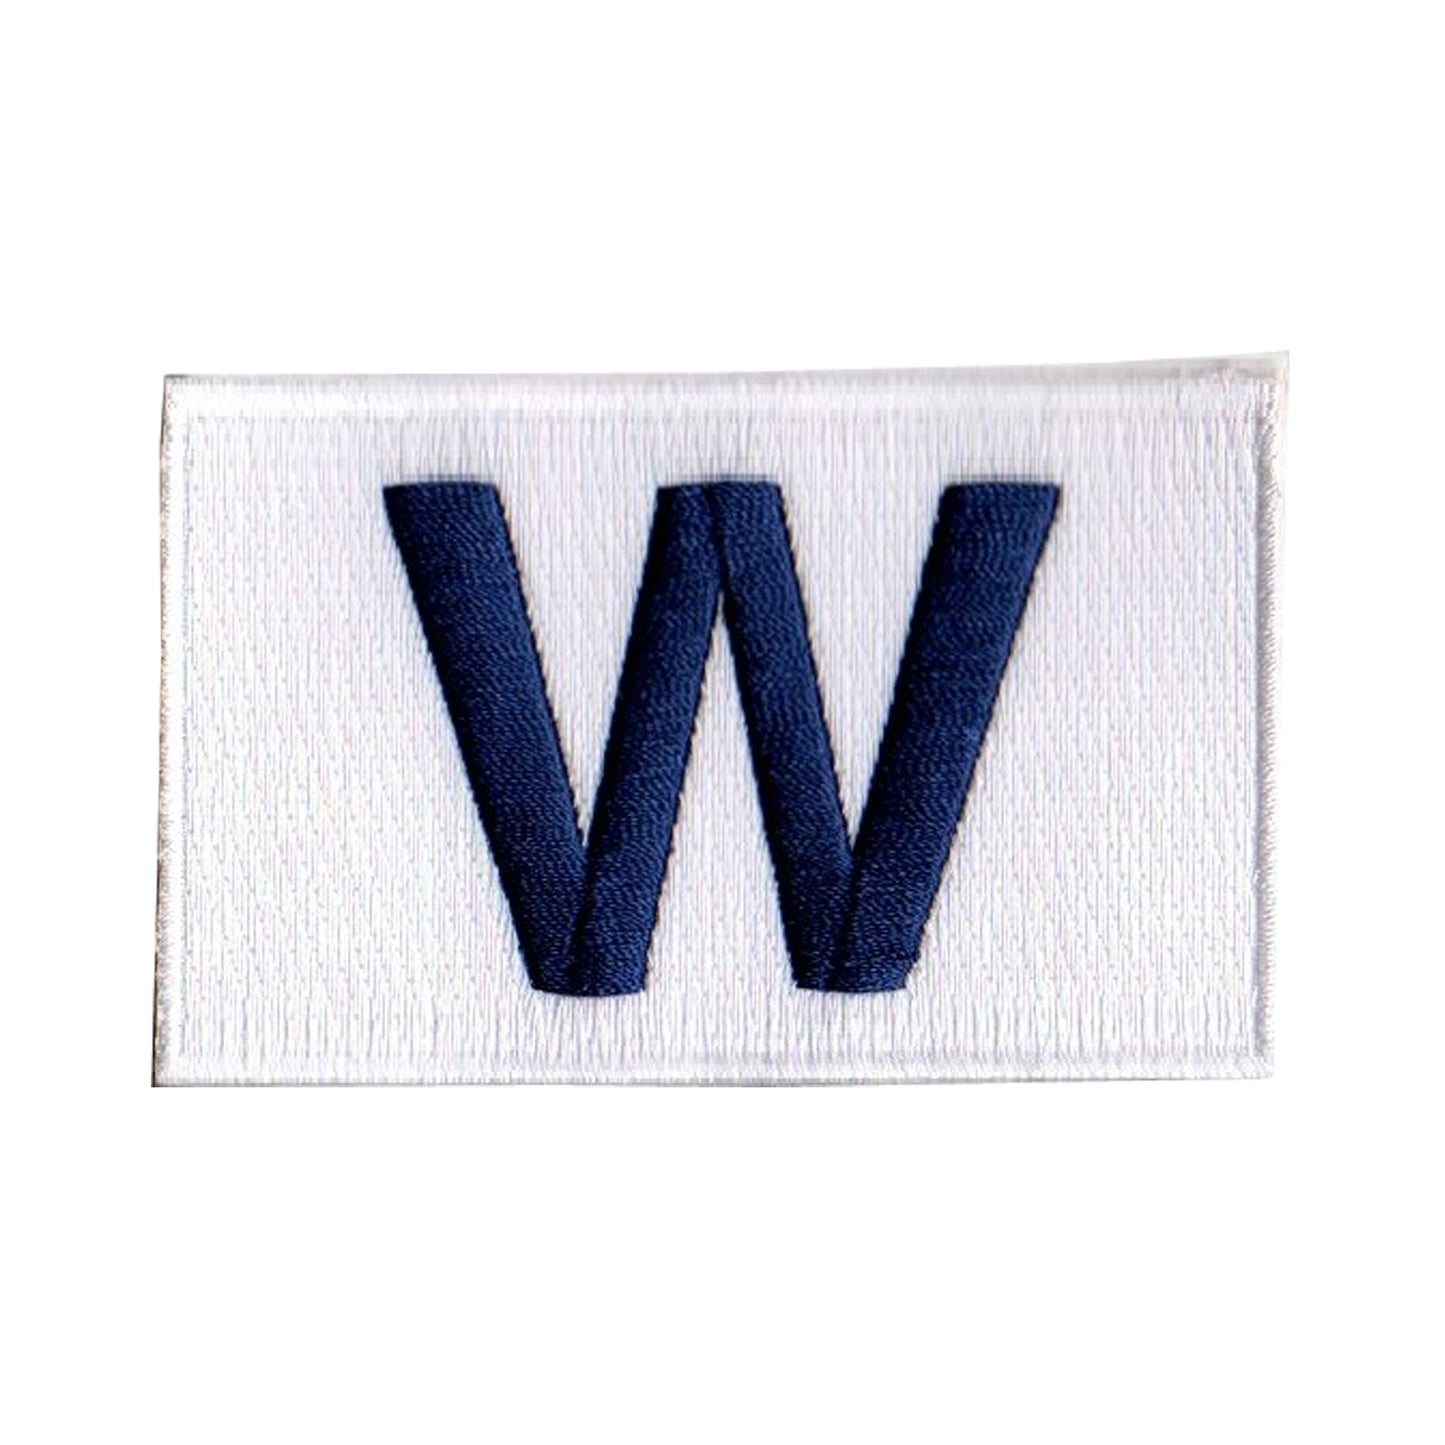 Chicago Cubs 2.5" x 3.5" W Flag Patch